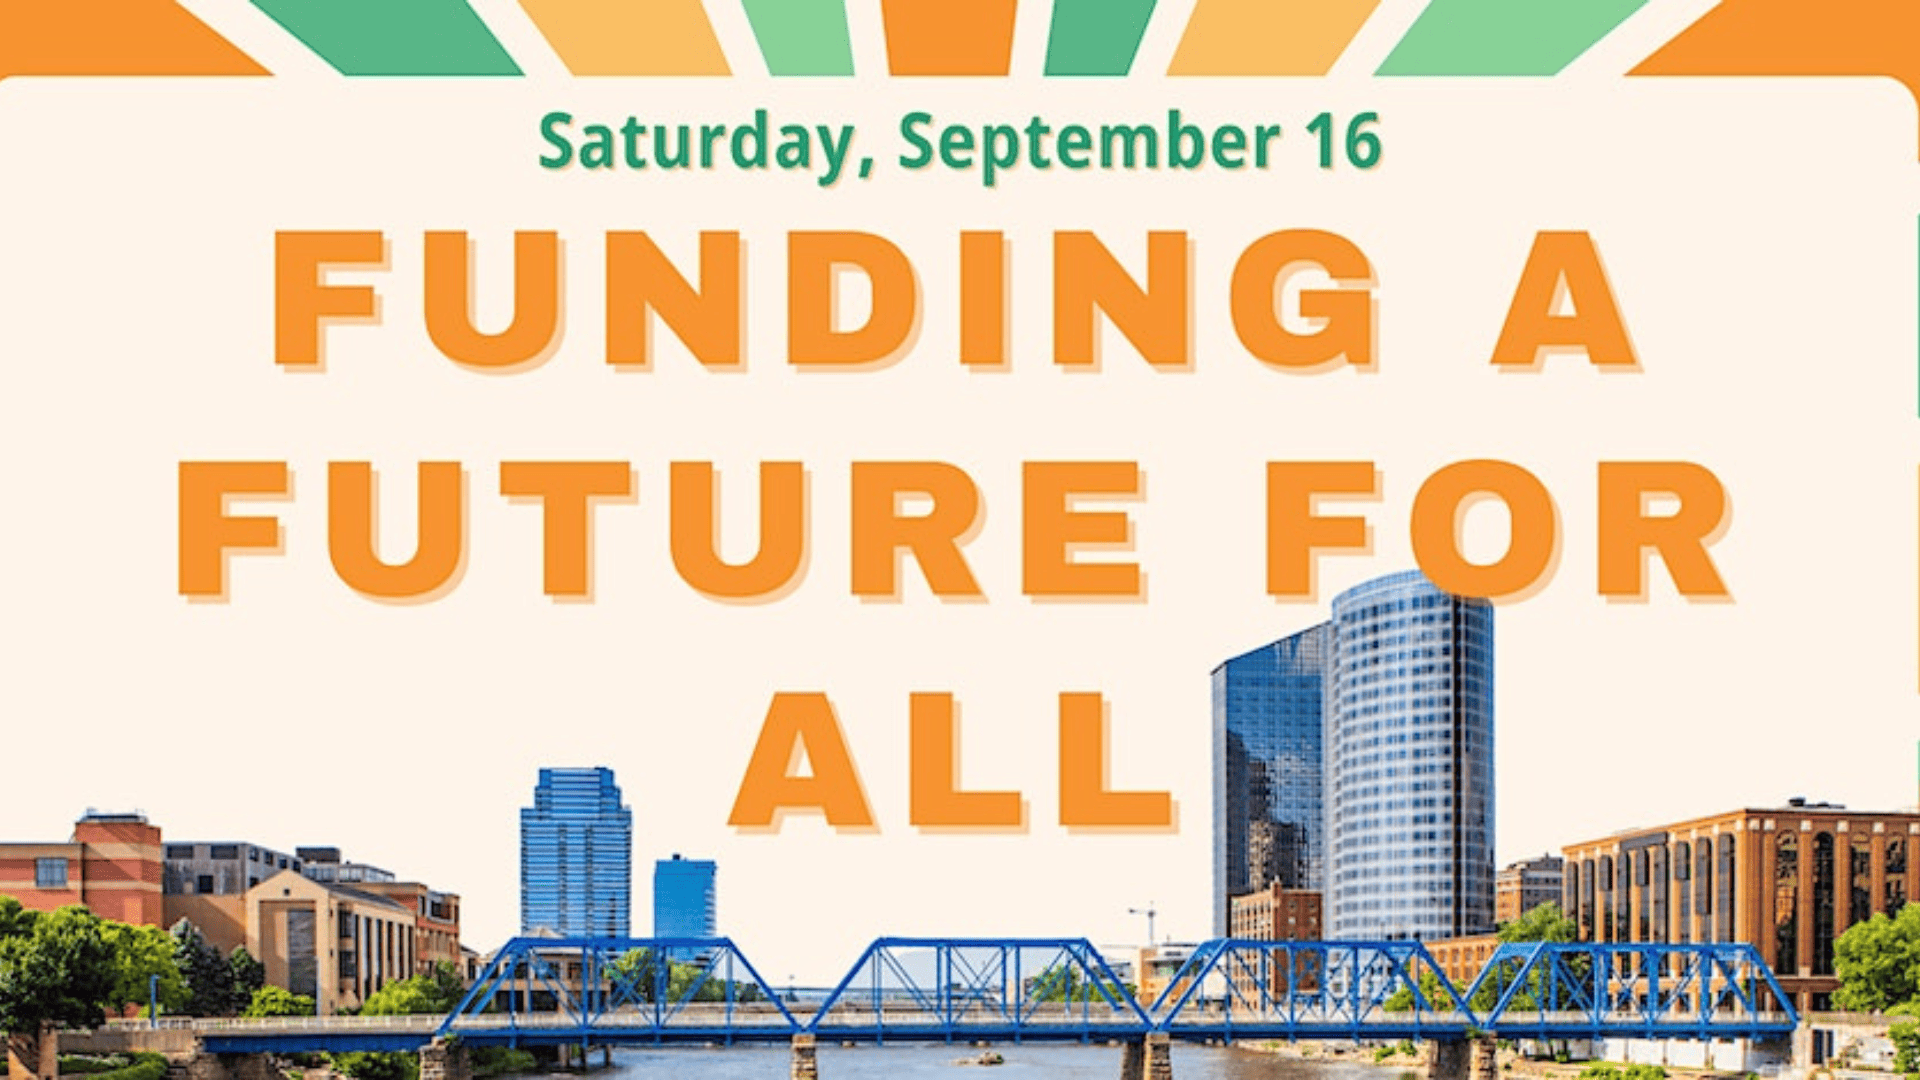 Funding a Future for All